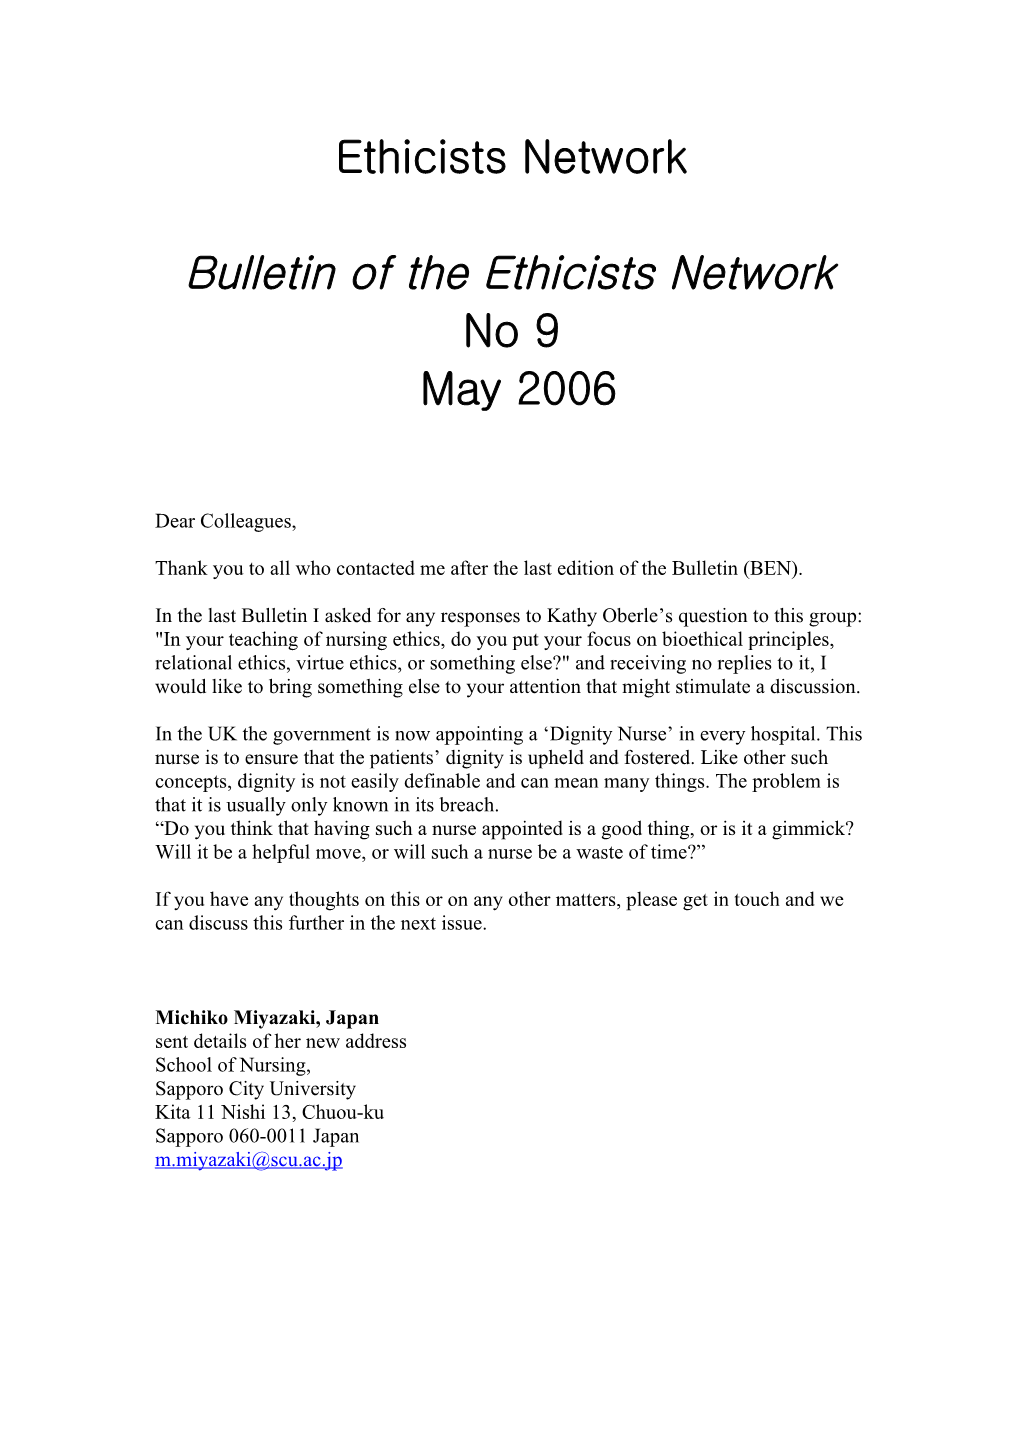 Bulletin of the Ethicists Network